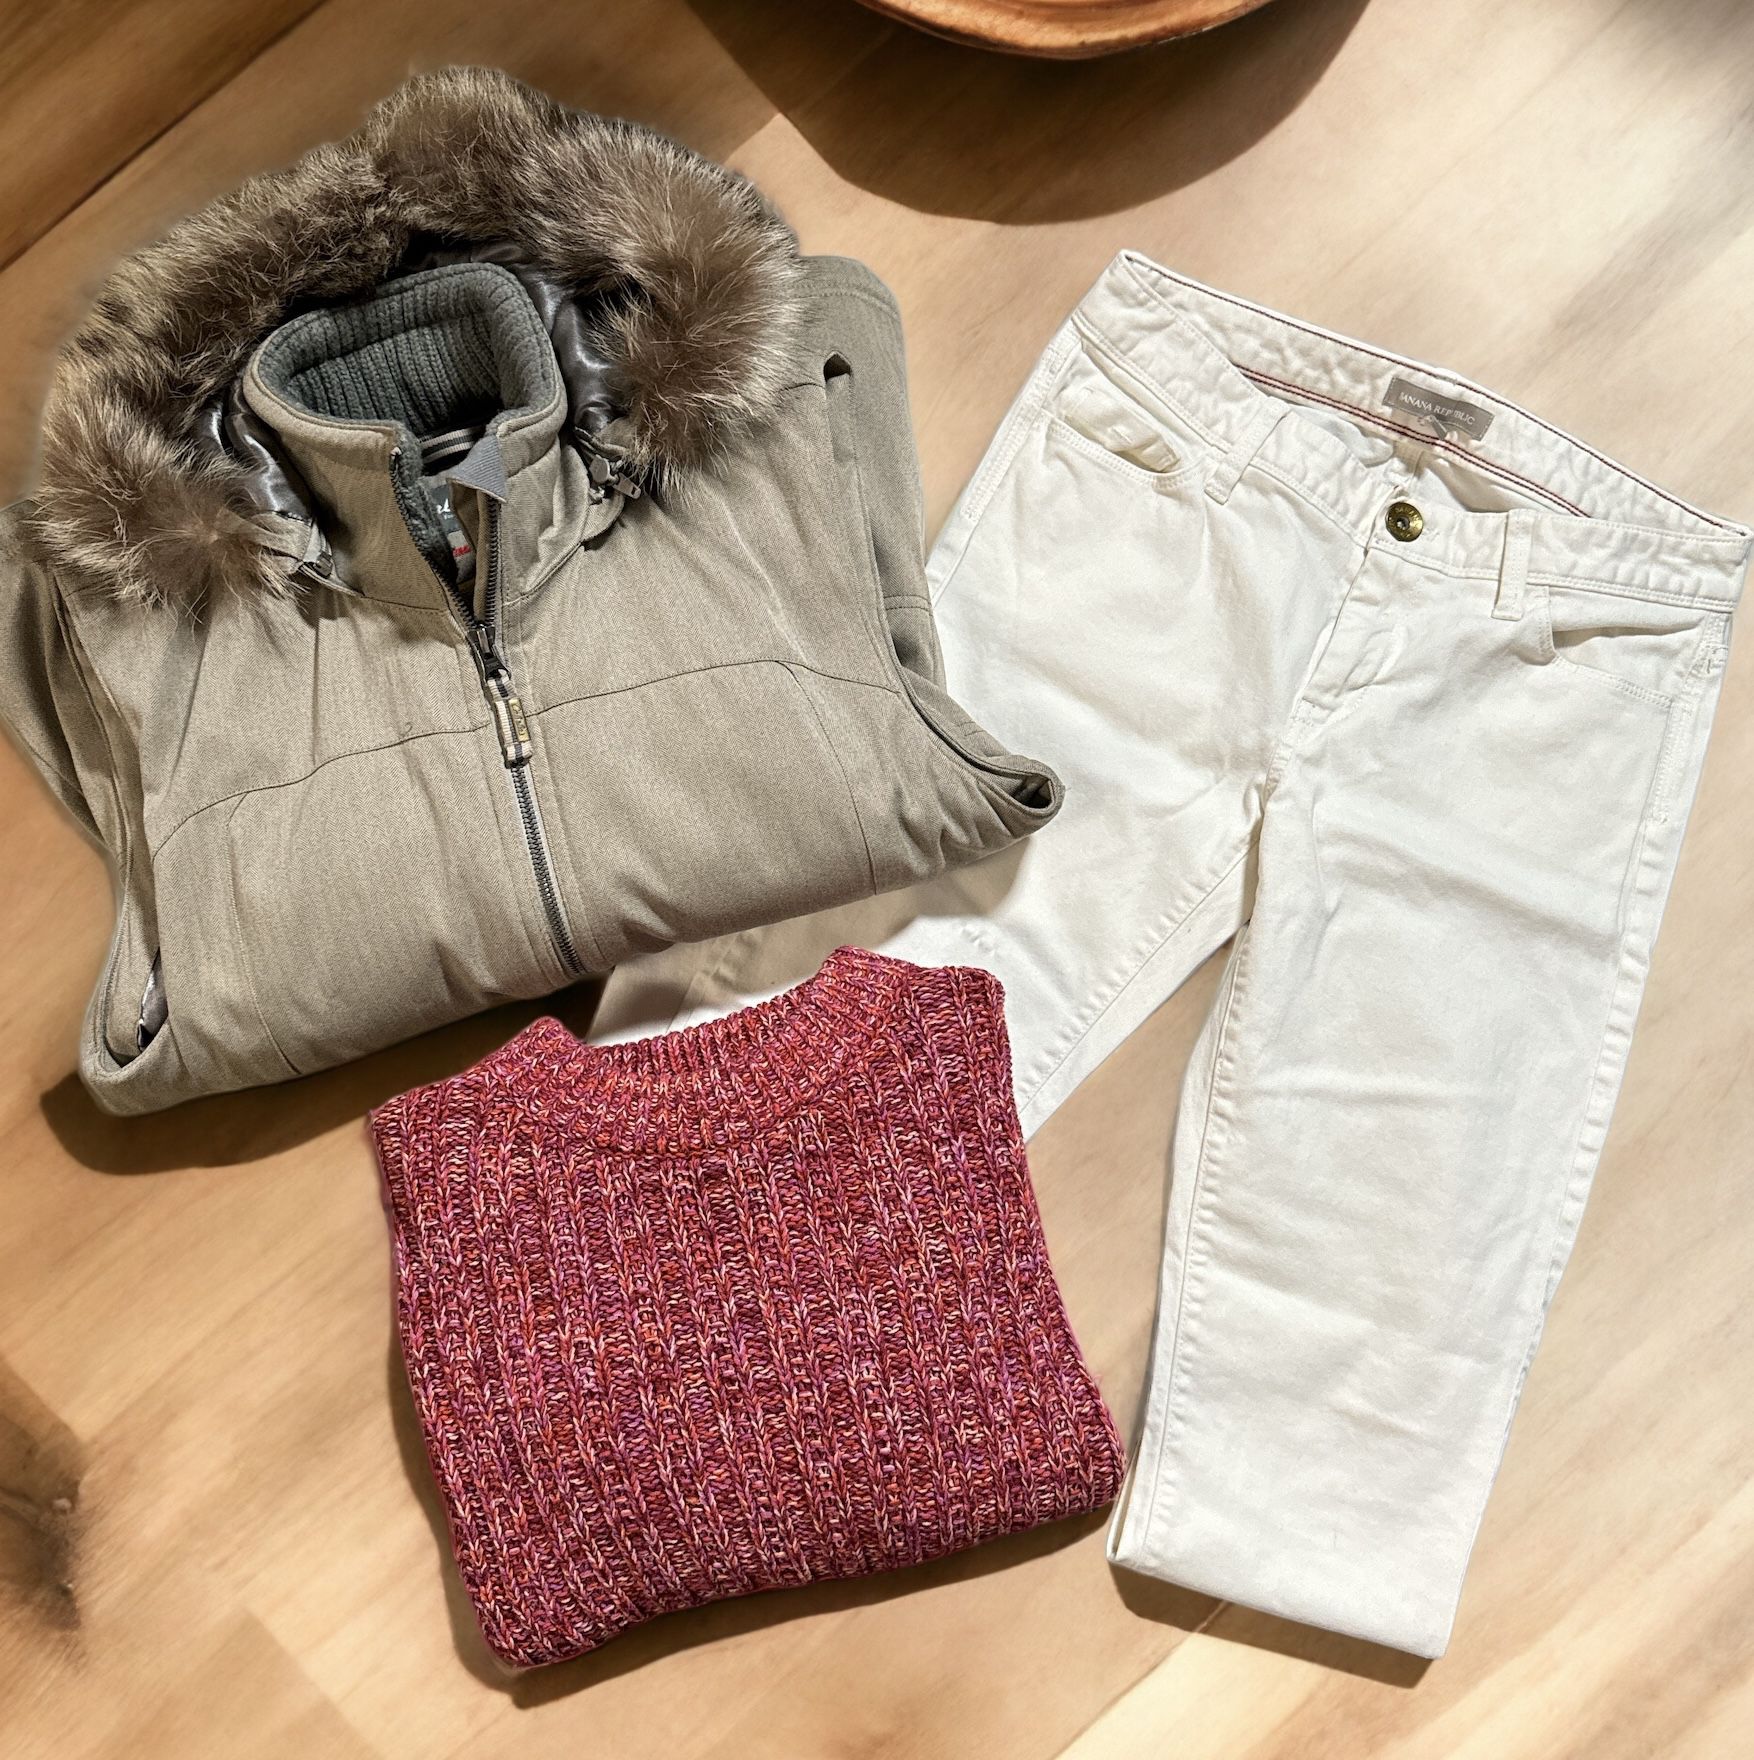 Winter Outfit With Cabelas Fur Trimmed Vest Banana Republic Jeans And Sweater All Size Small